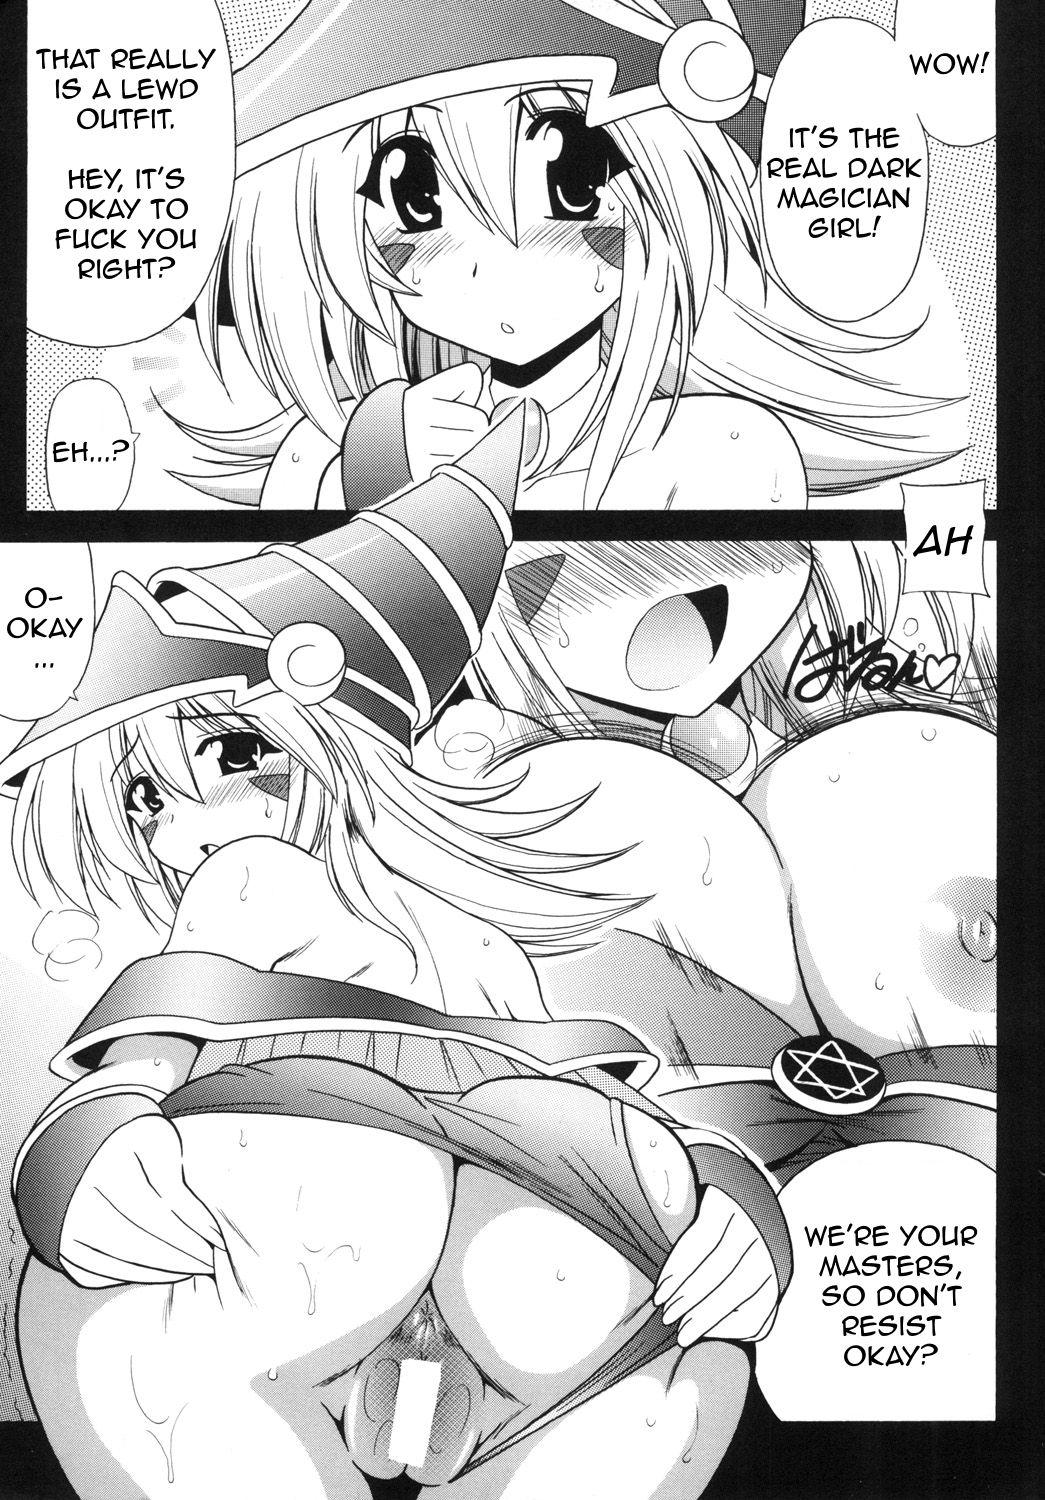 Daddy BMG to Ecchi Shiyou ♡ | Let's Have Sex with Dark Magician Girl ♡ - Yu-gi-oh Gros Seins - Page 3